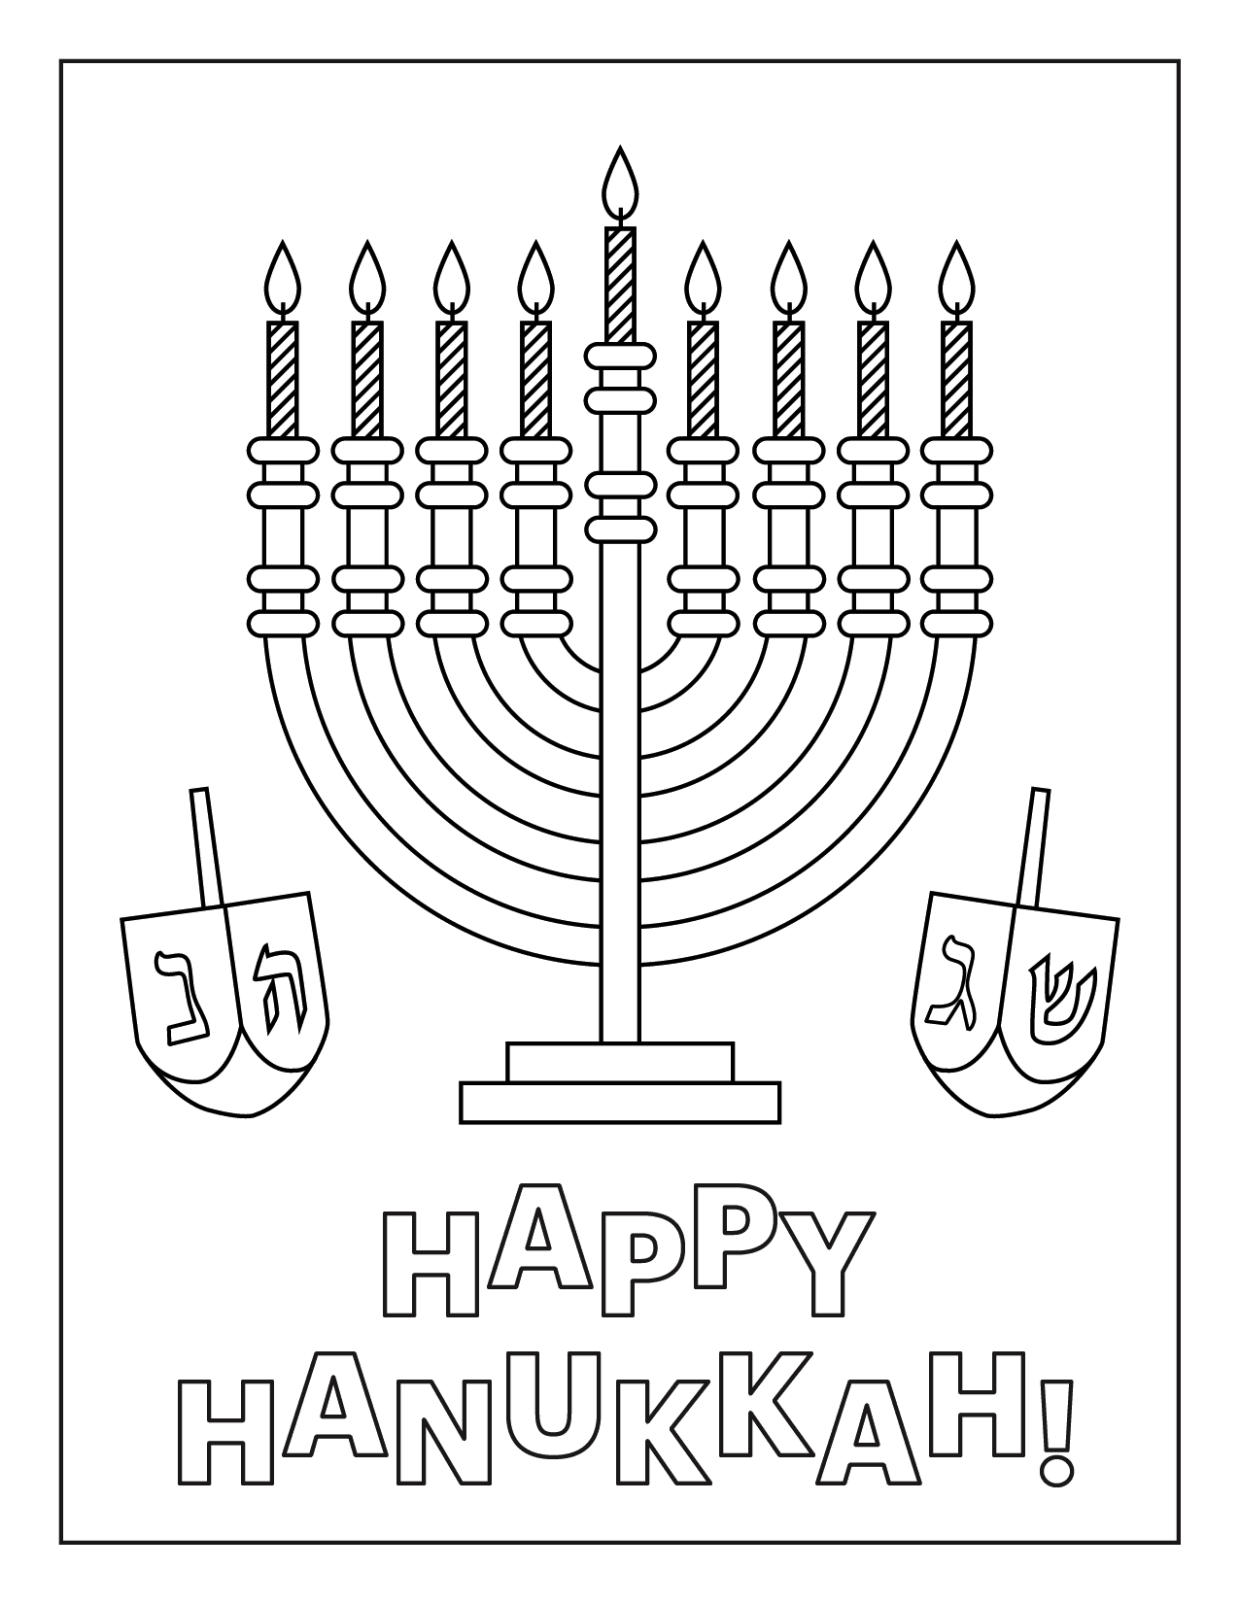 Hanukkah coloring pages for kids